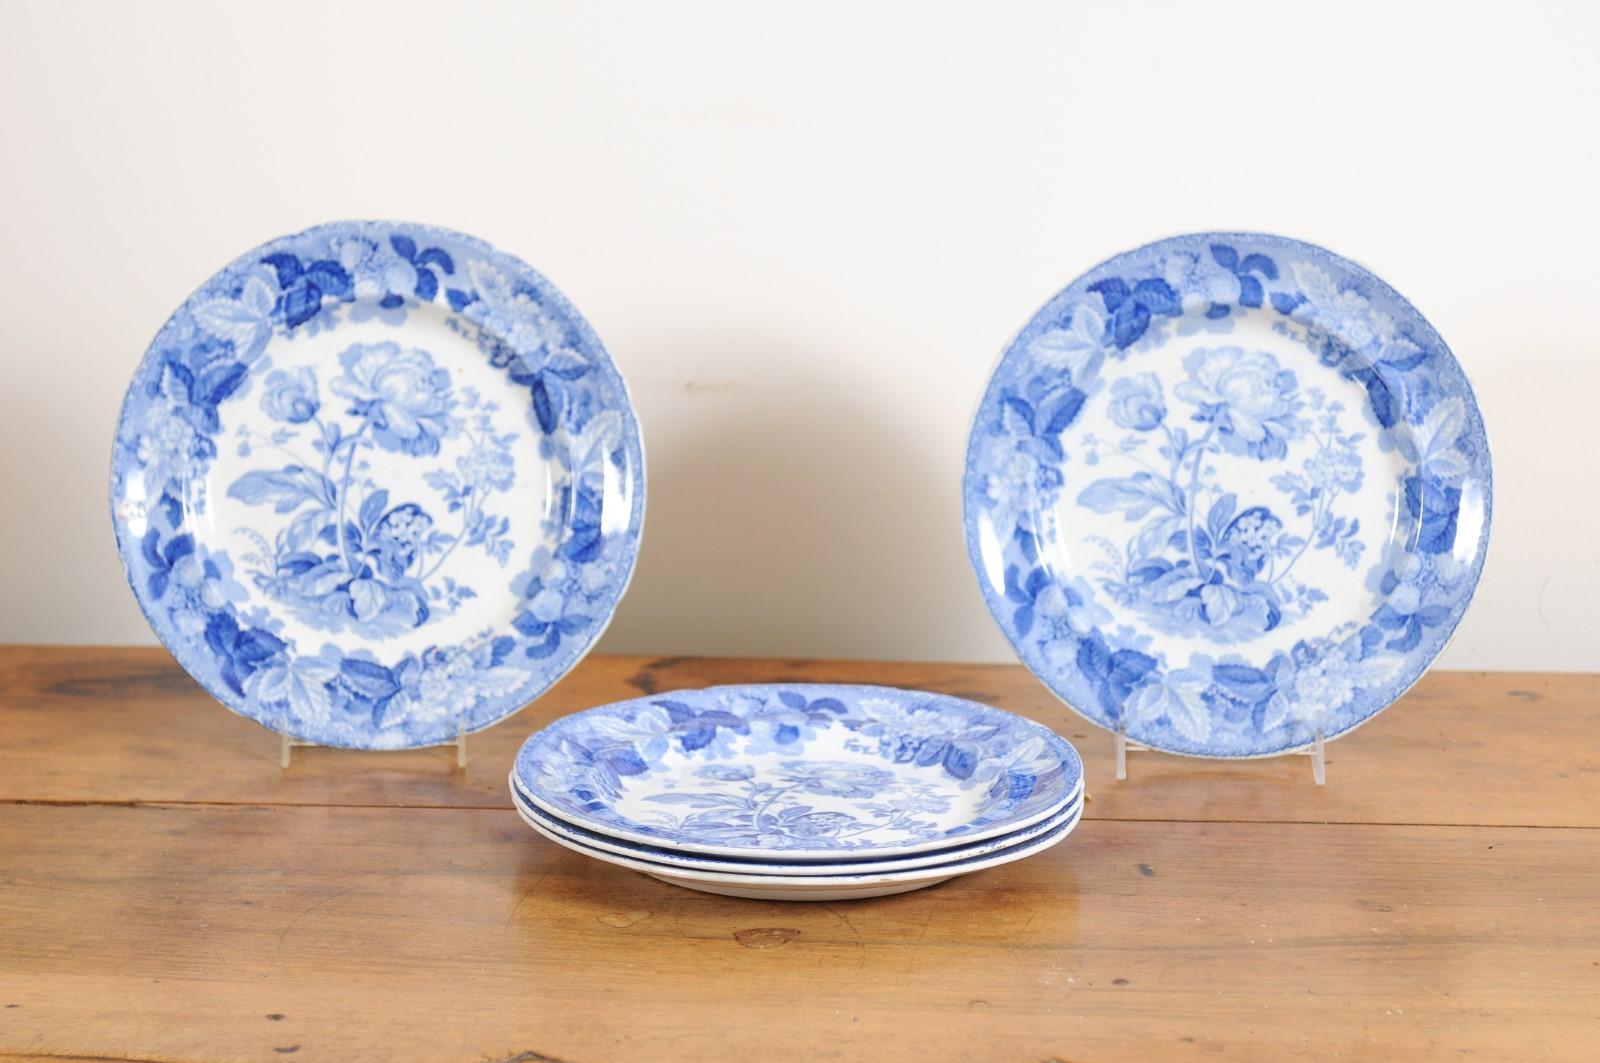 A set of five English blue and white porcelain plates from the 19th century, with rare floral pattern. Created in England during the 19th century, these plates can also be used as bowls. Adorned with a blue and white décor showcasing a rare floral